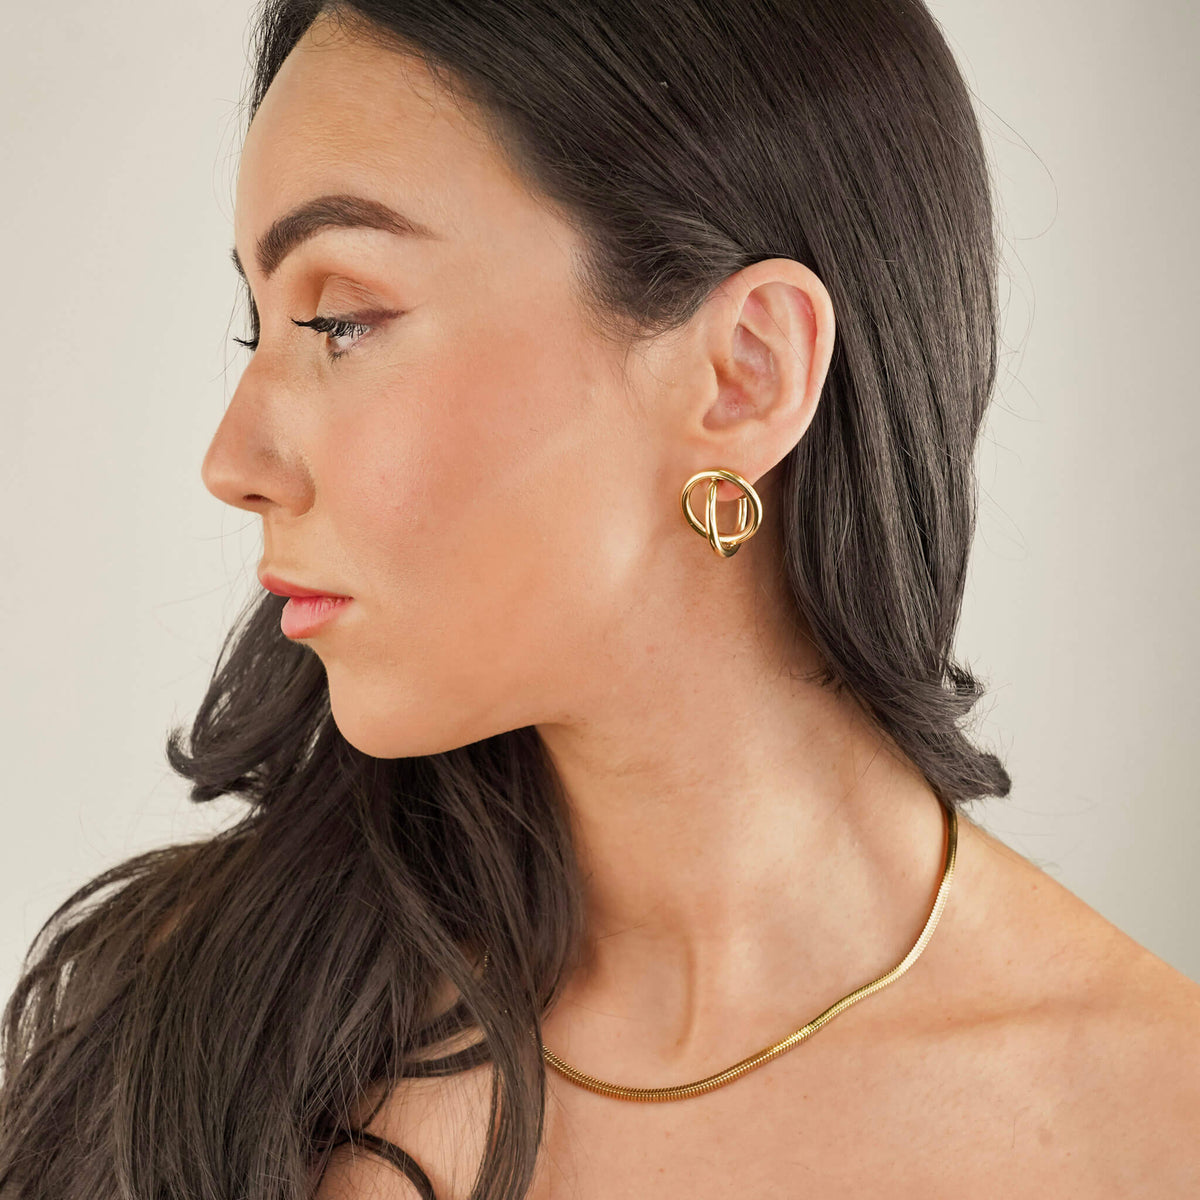 textured herringbone snake chain in gold plating available to shop at Mettle & Bloom. The Rhea chain is worn here by a model who has styled the Rhea chain with the Helix earrings. 